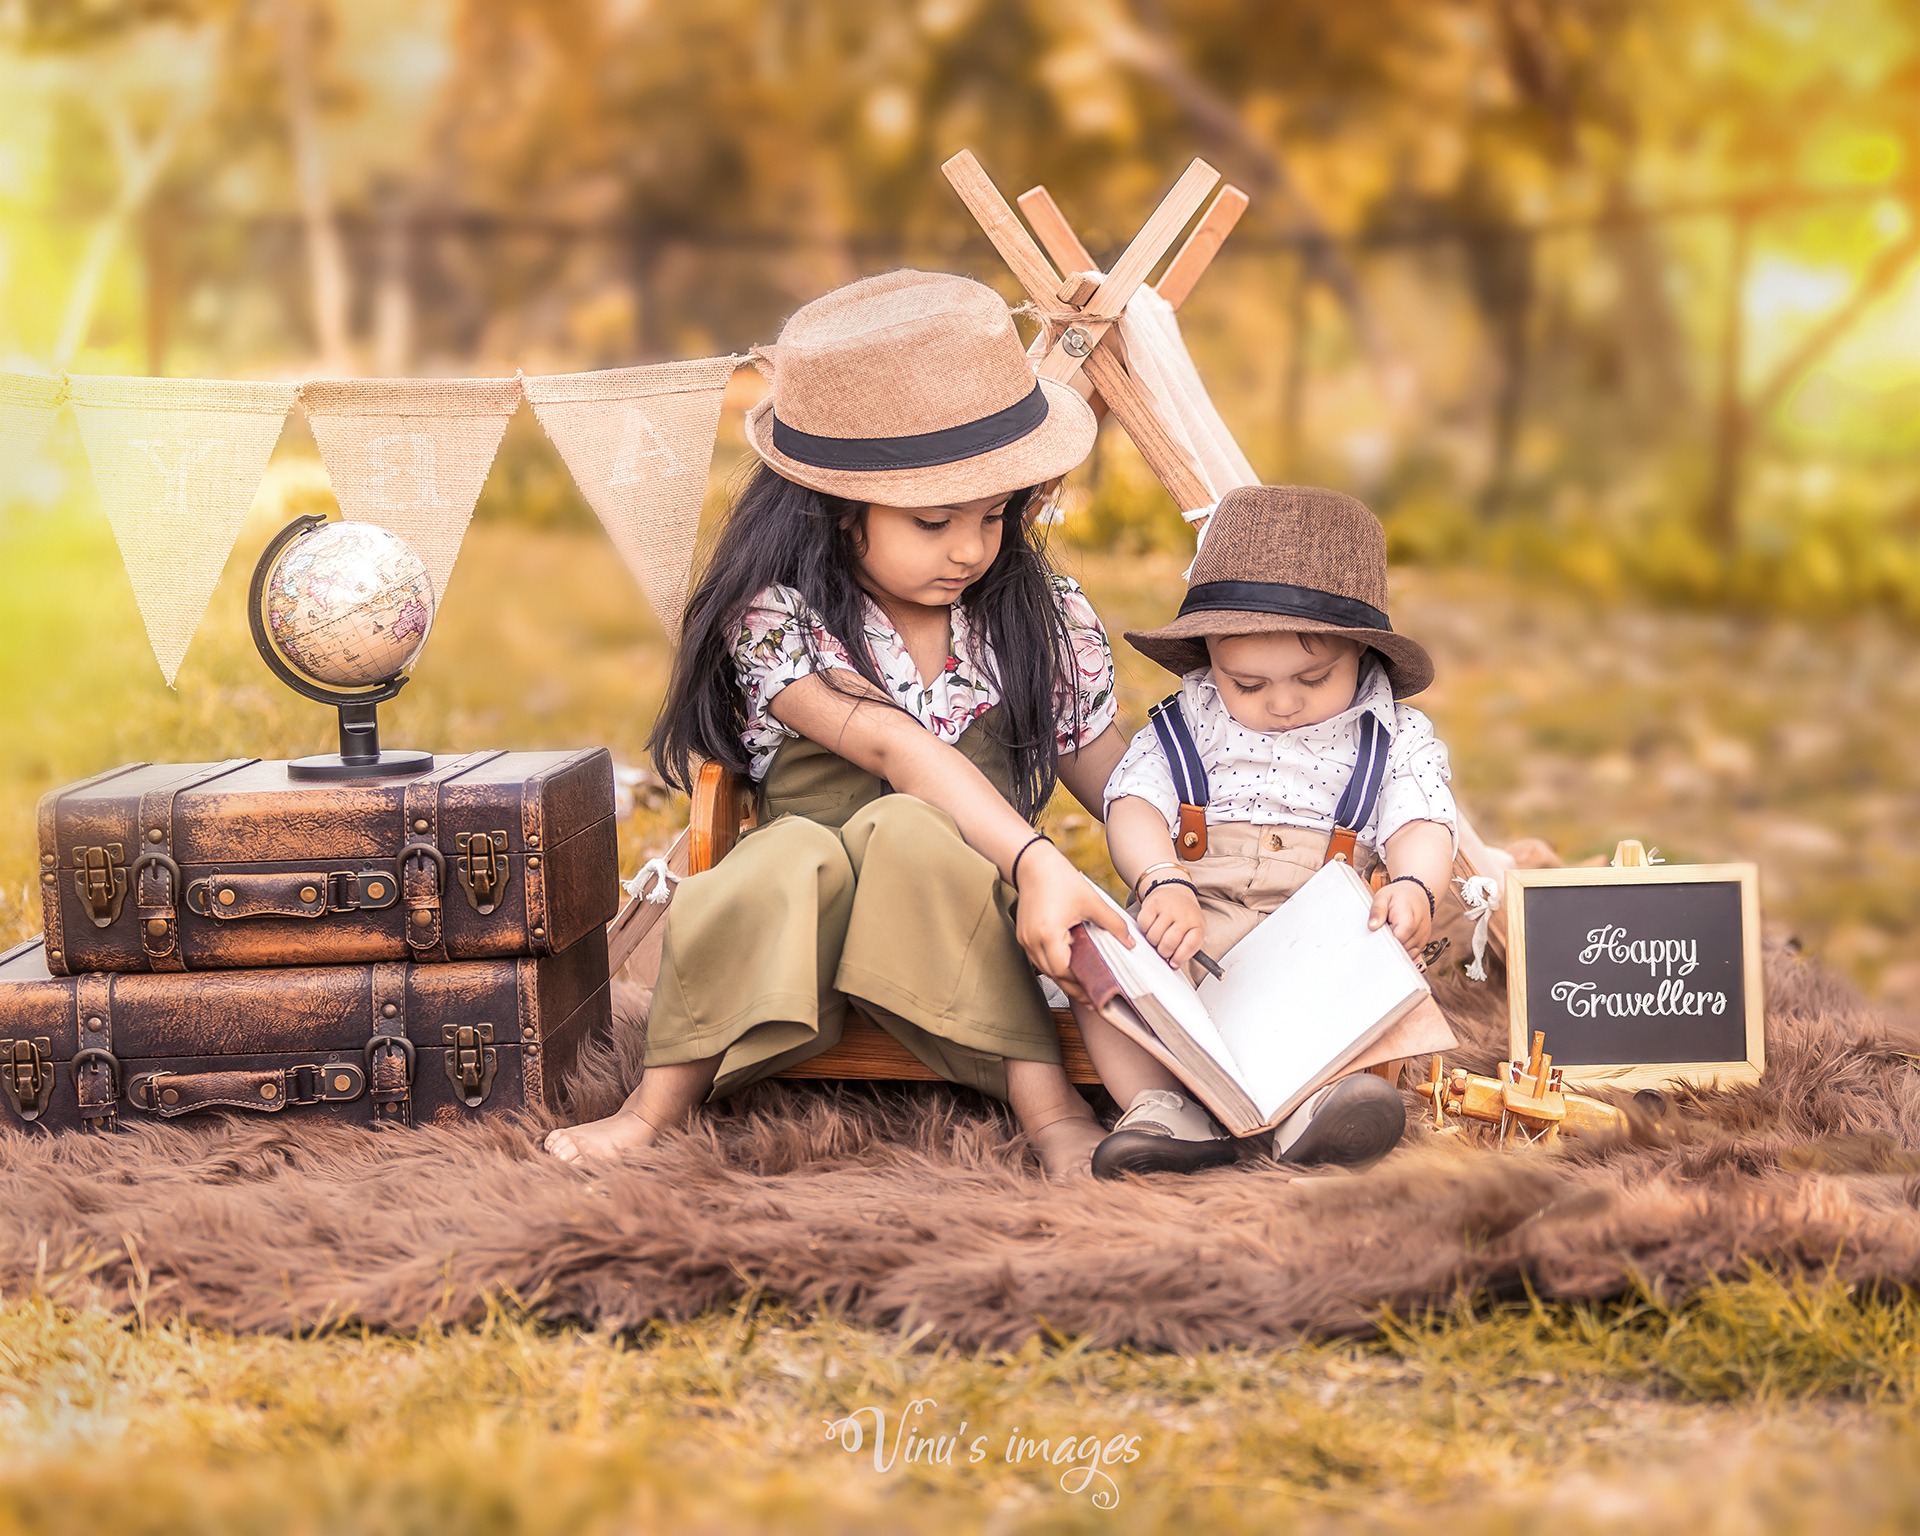 Outdoor travel theme for sibling photoshoot in Delhi, photography by Vinus Images